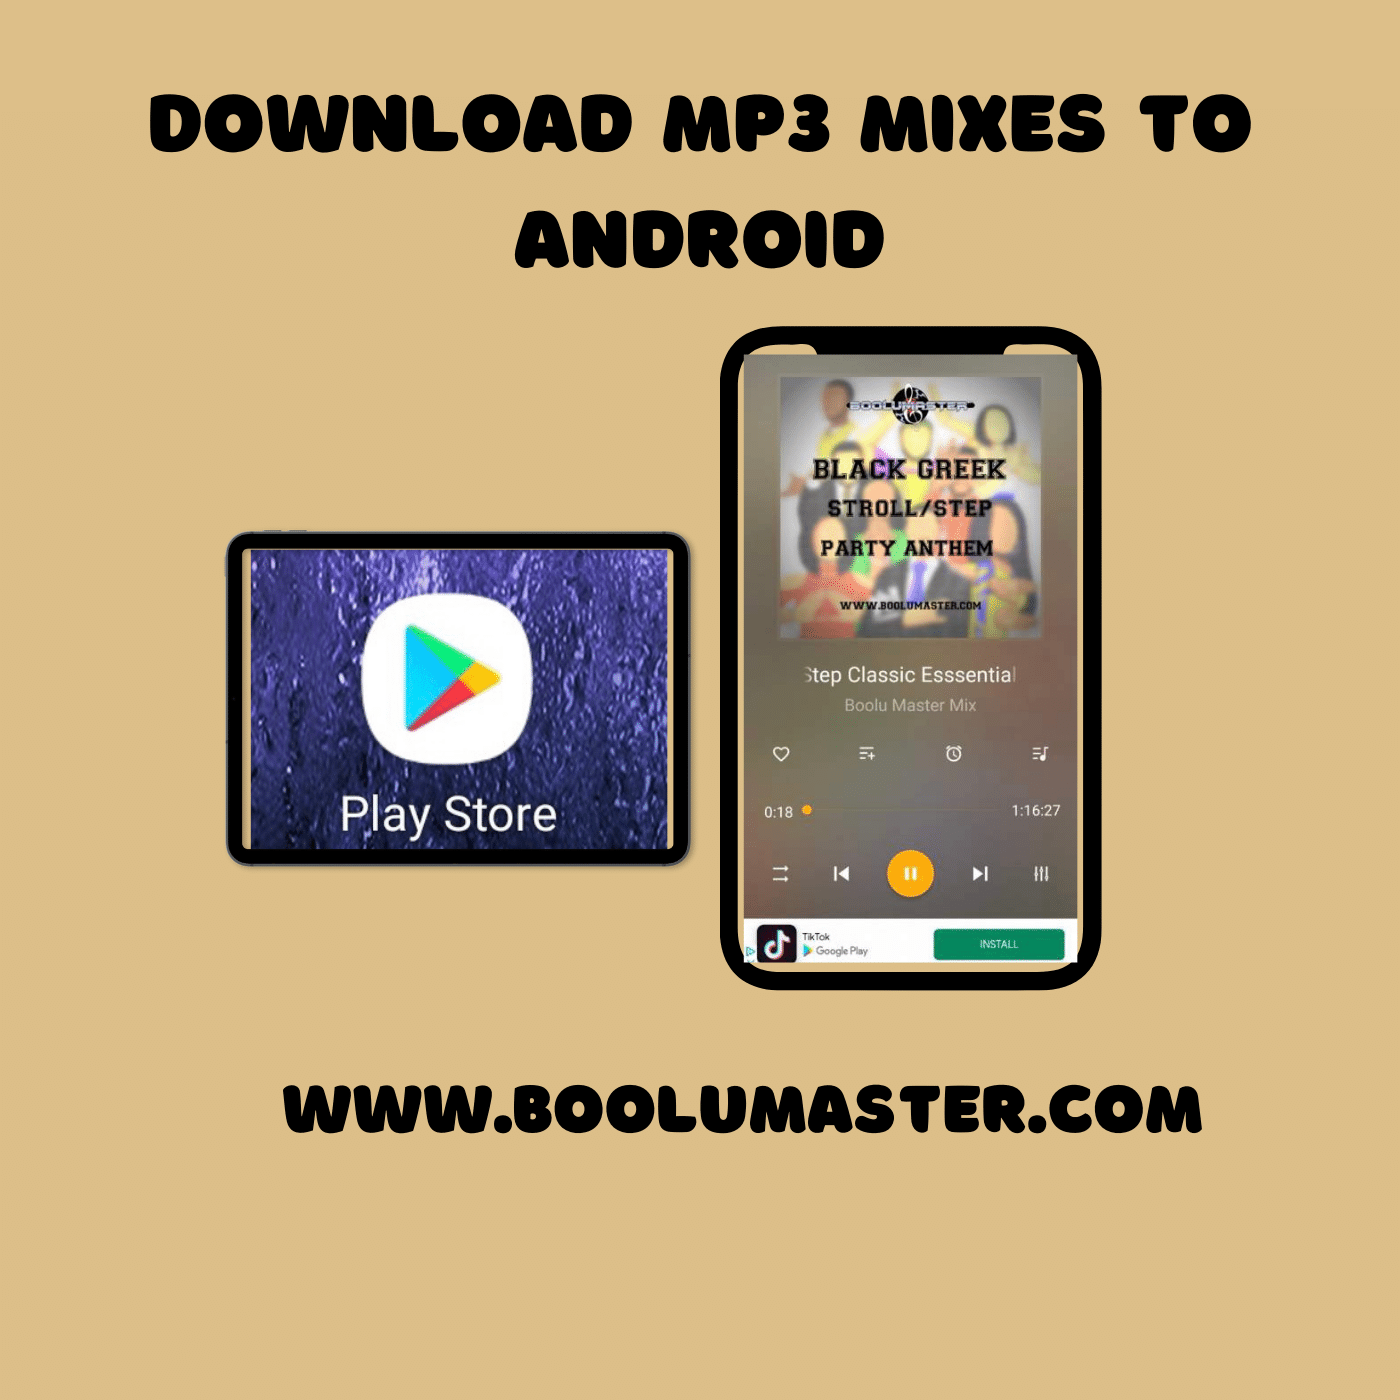 downloading to a android phone boolumaster mixes